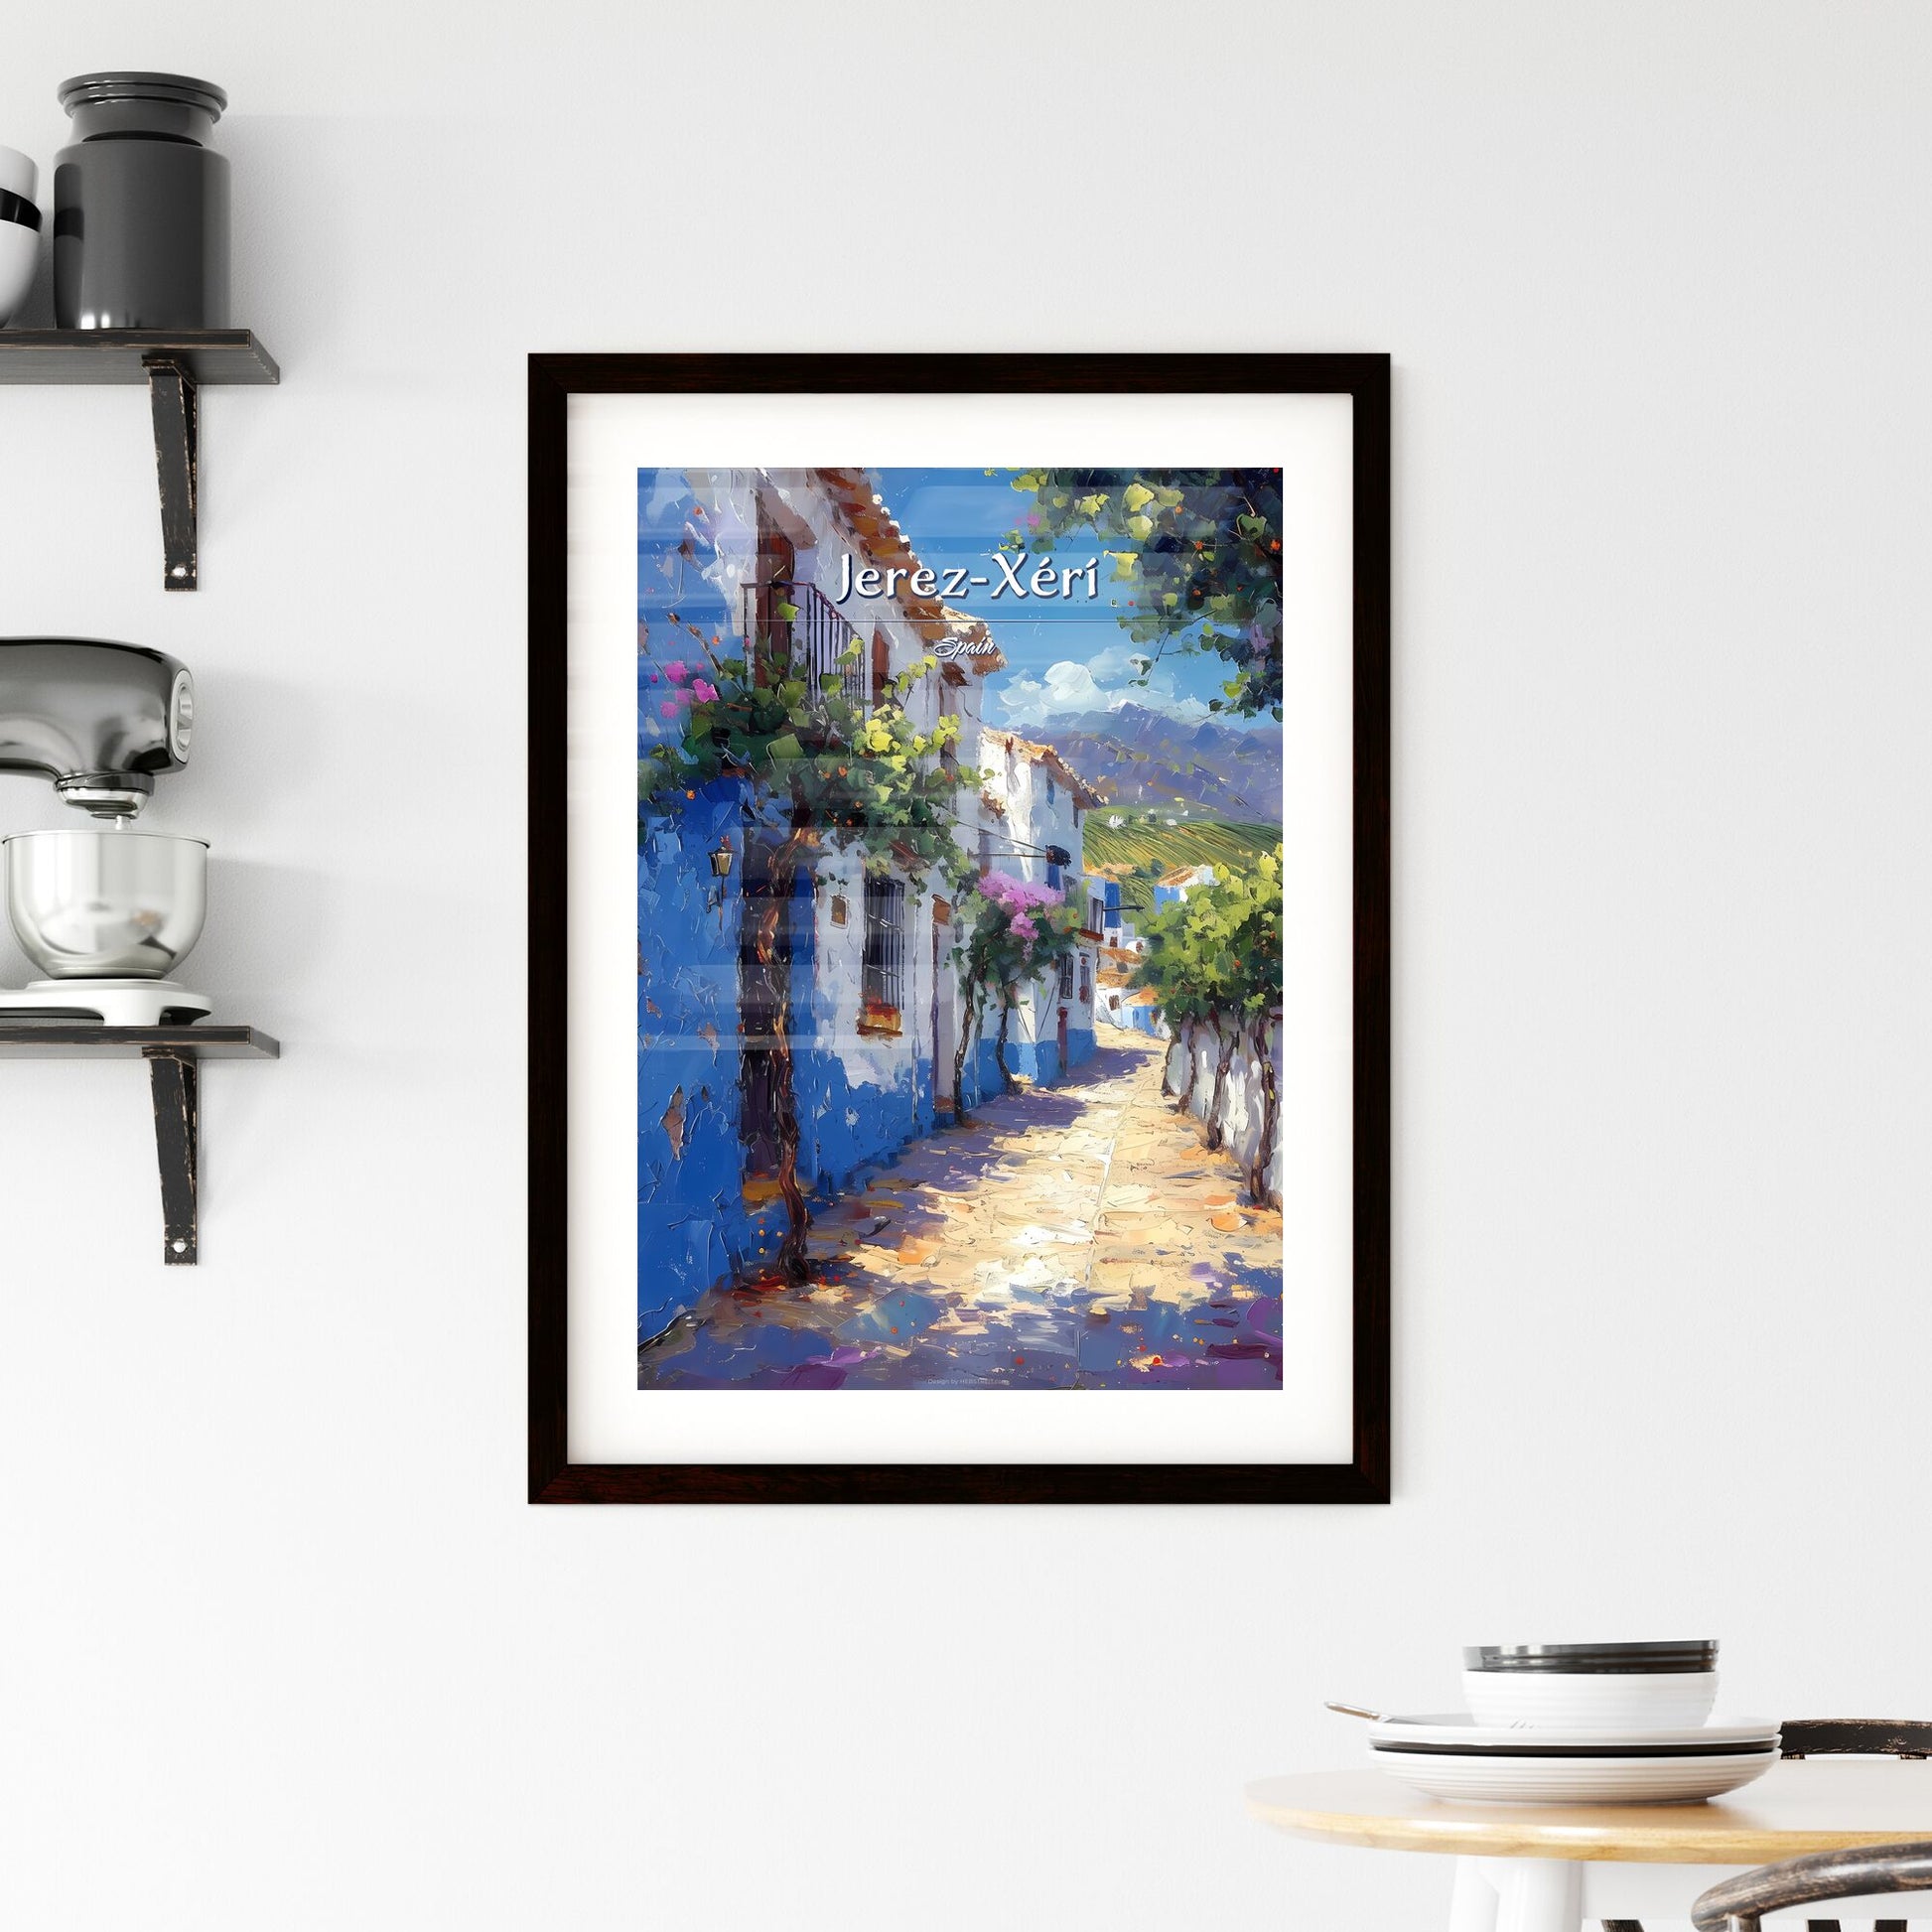 Jerez-Xérí, Spain - Art print of a painting of a street with white buildings and blue walls Default Title